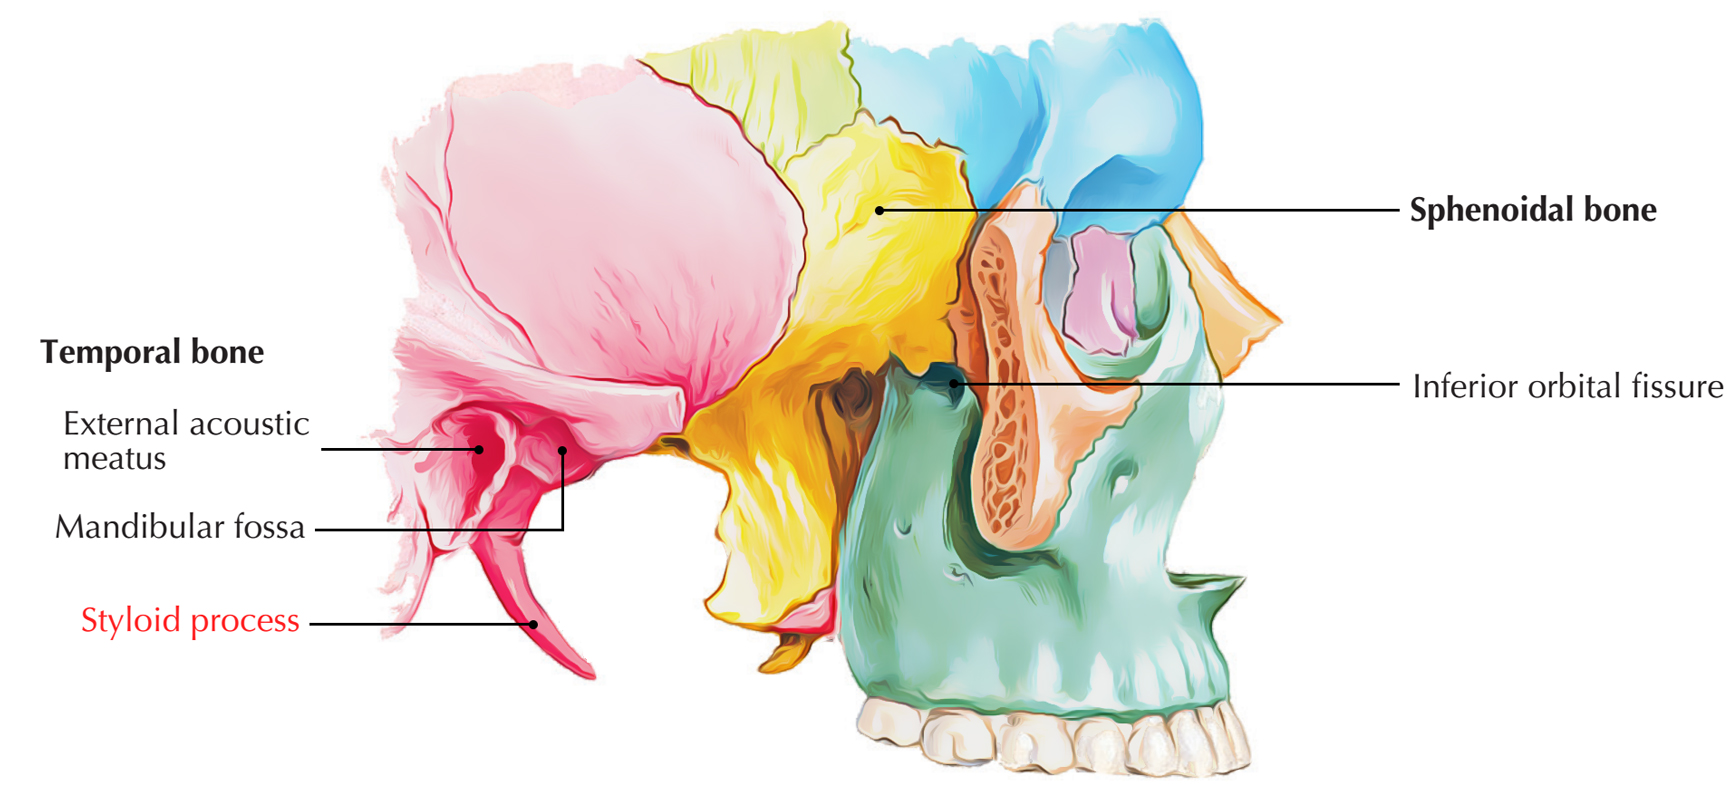 Styloid Process of Temporal Bone